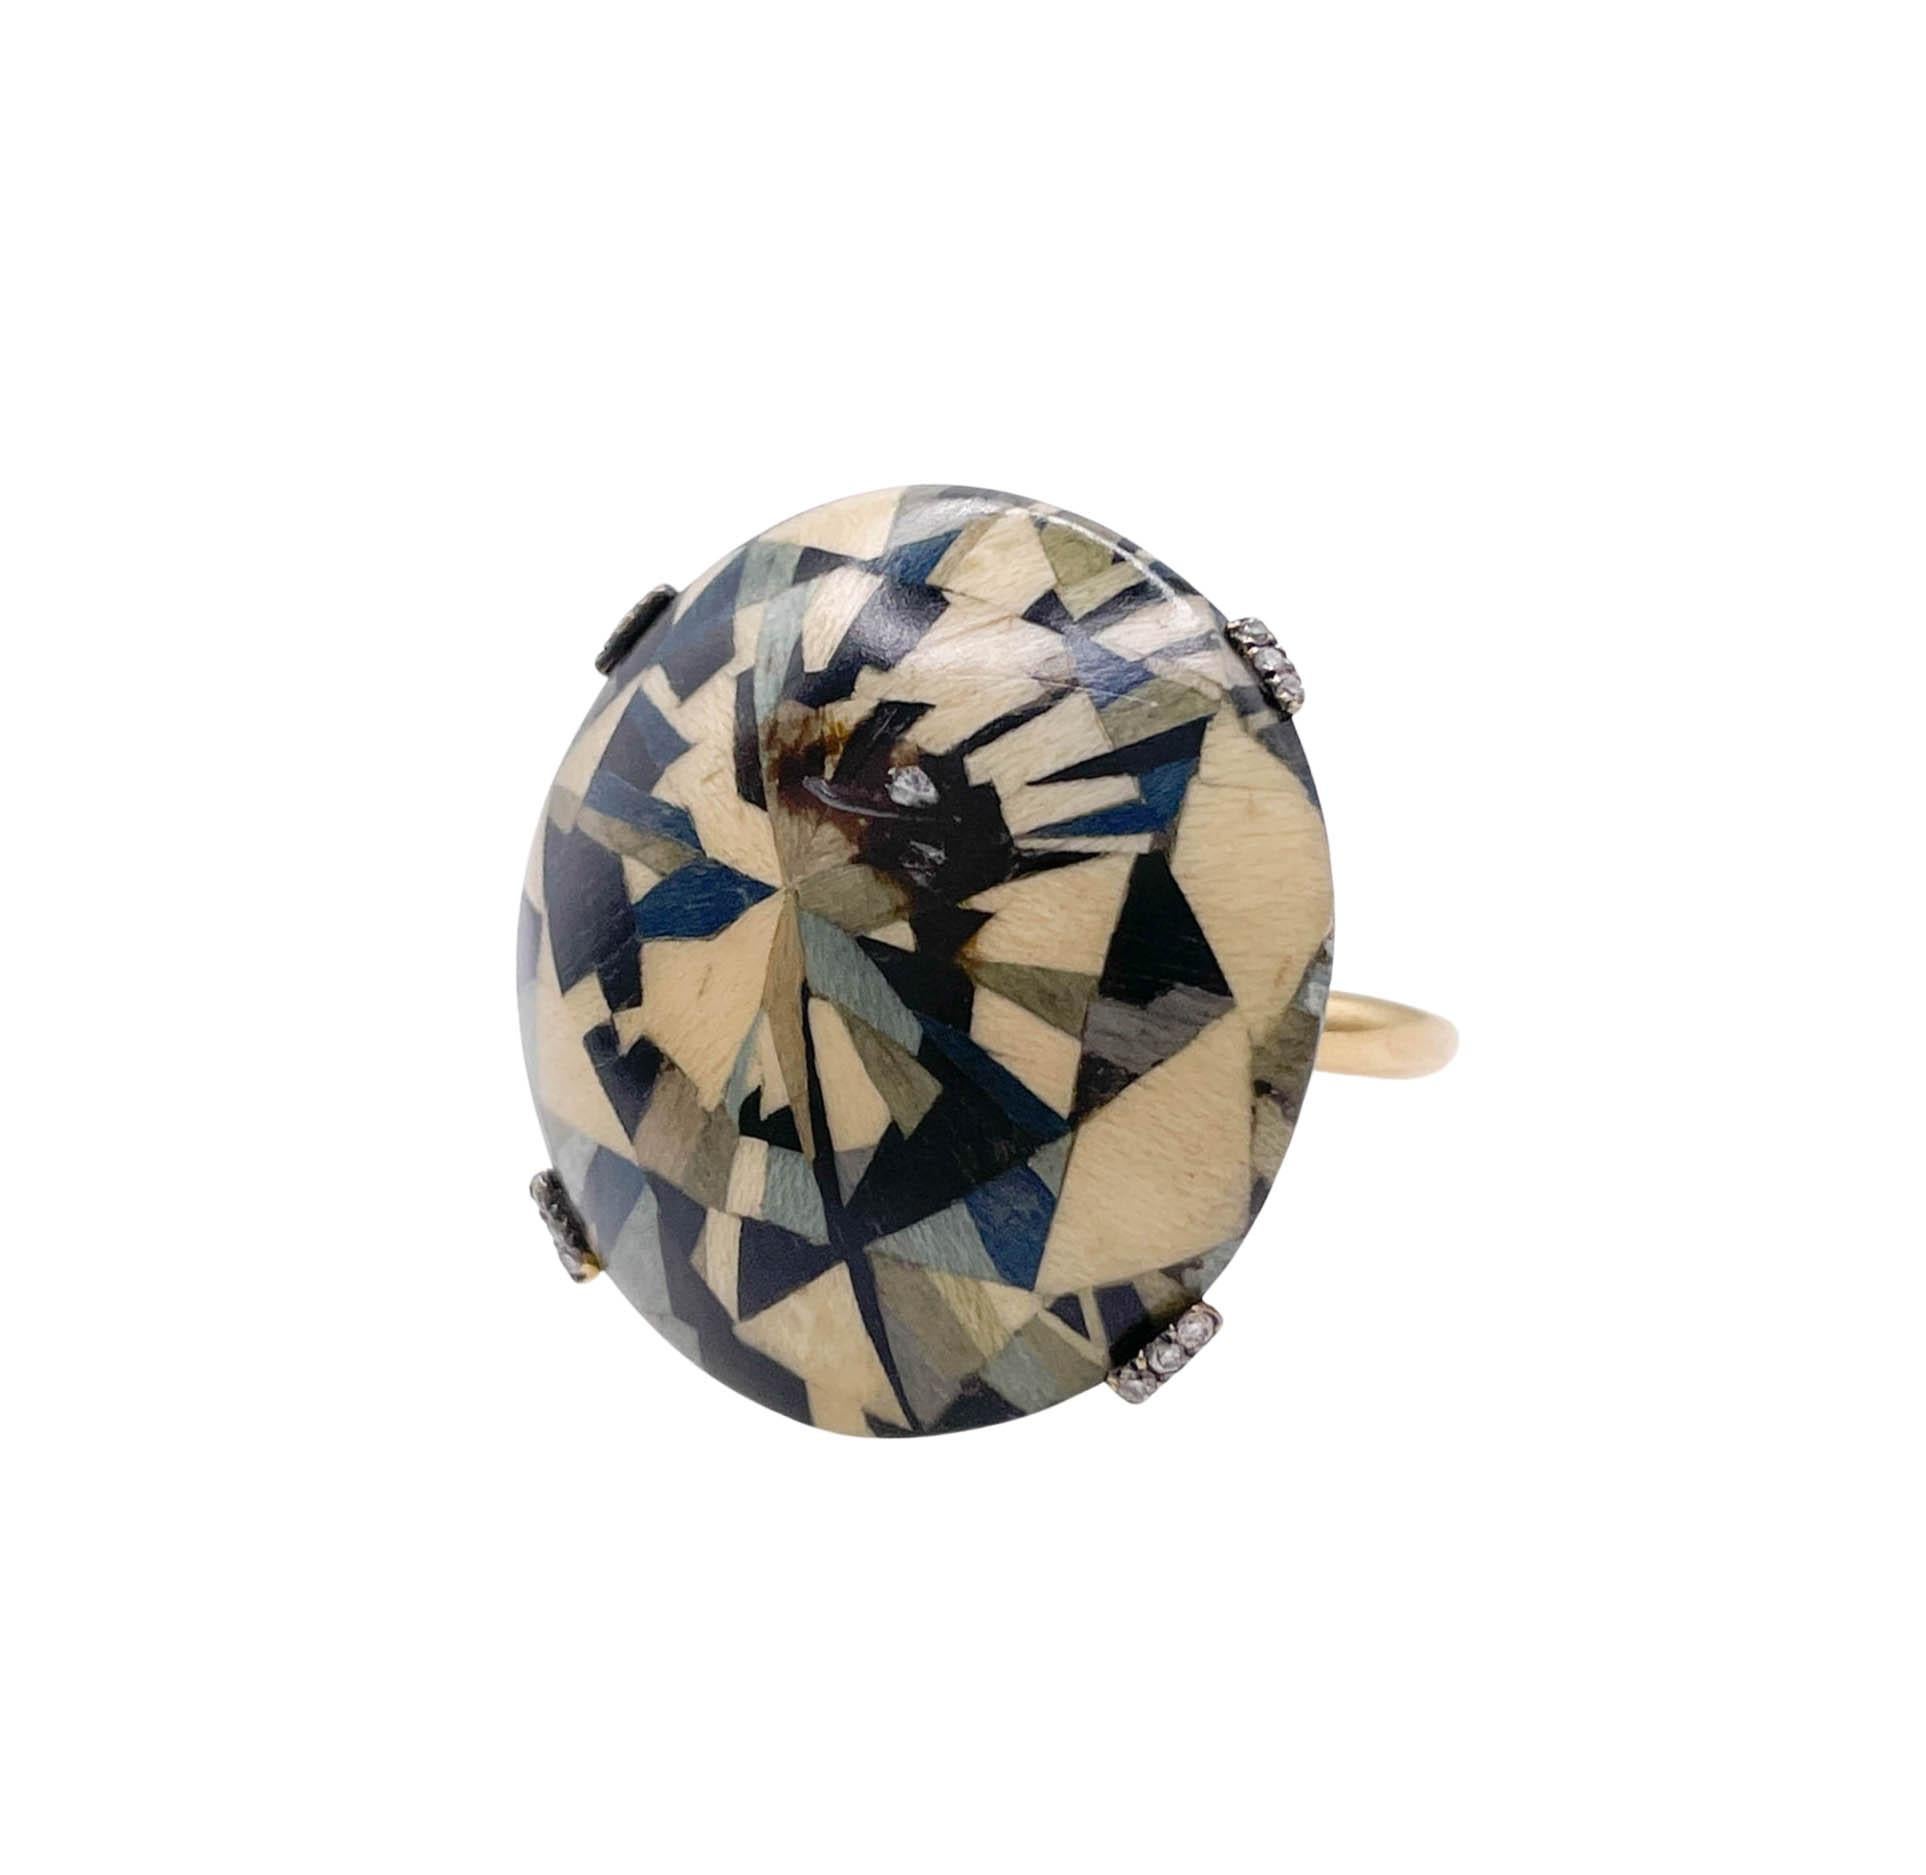 Silvia Furmanovich 18k Yellow Gold Diamond and Marquetry Wood Ring with 0.05 Round Brilliant Diamonds.
Marquetry wood measures to approx. 26mm in diameter.
Sits high, approx. 11mm from the top of the finger.
The ring size is 7.75 (contact for